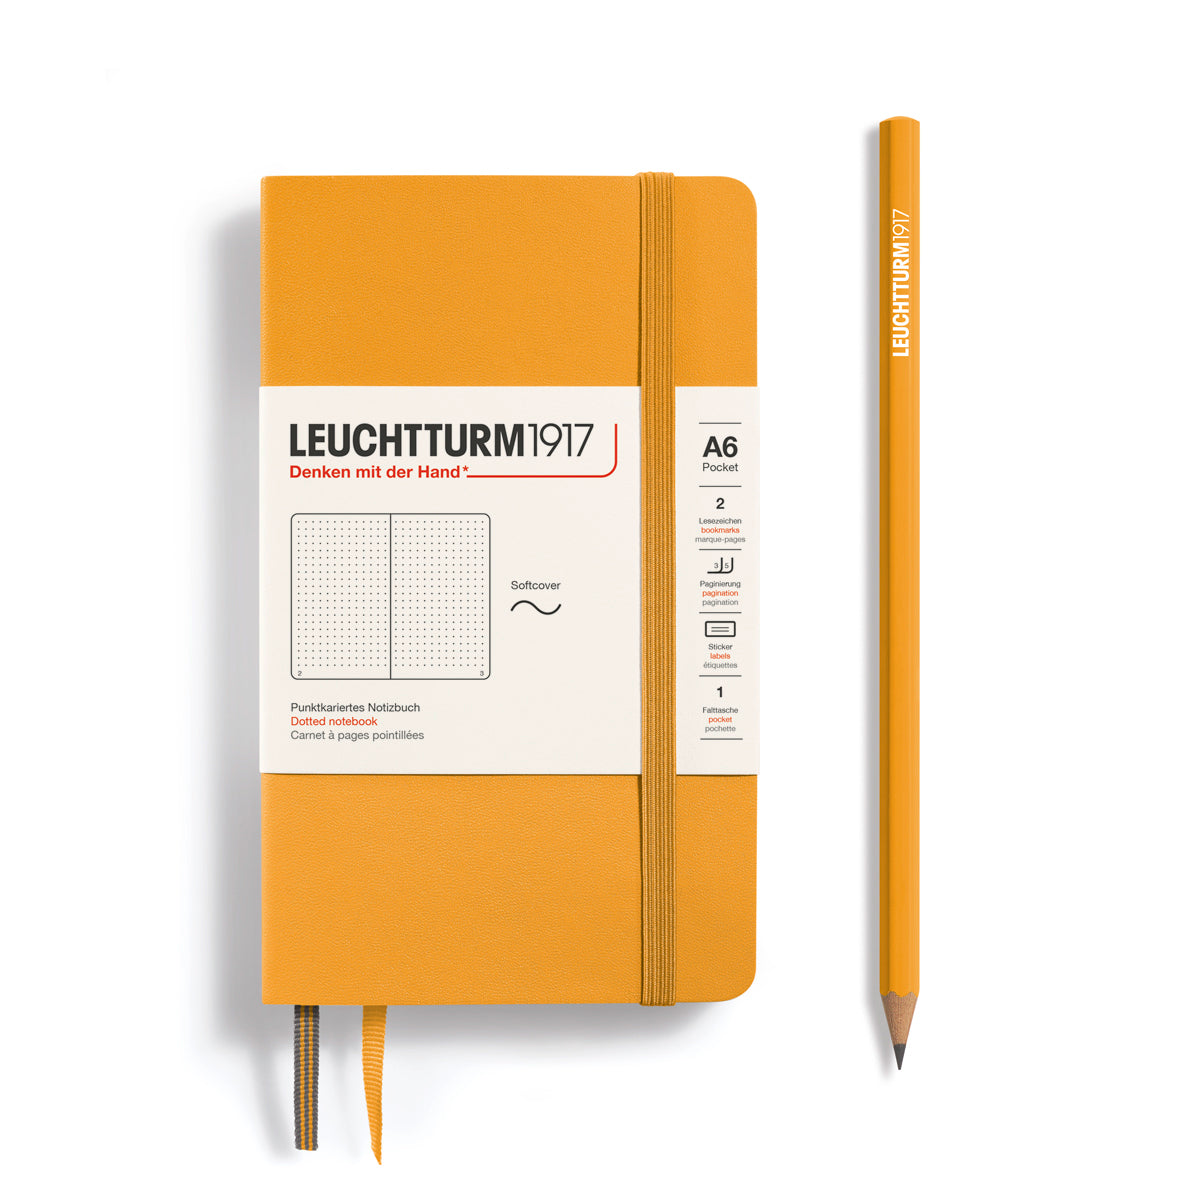 LEUCHTTURM1917 Notebook A6 Pocket Softcover in rising sun orange and dotted inside at Penny Black